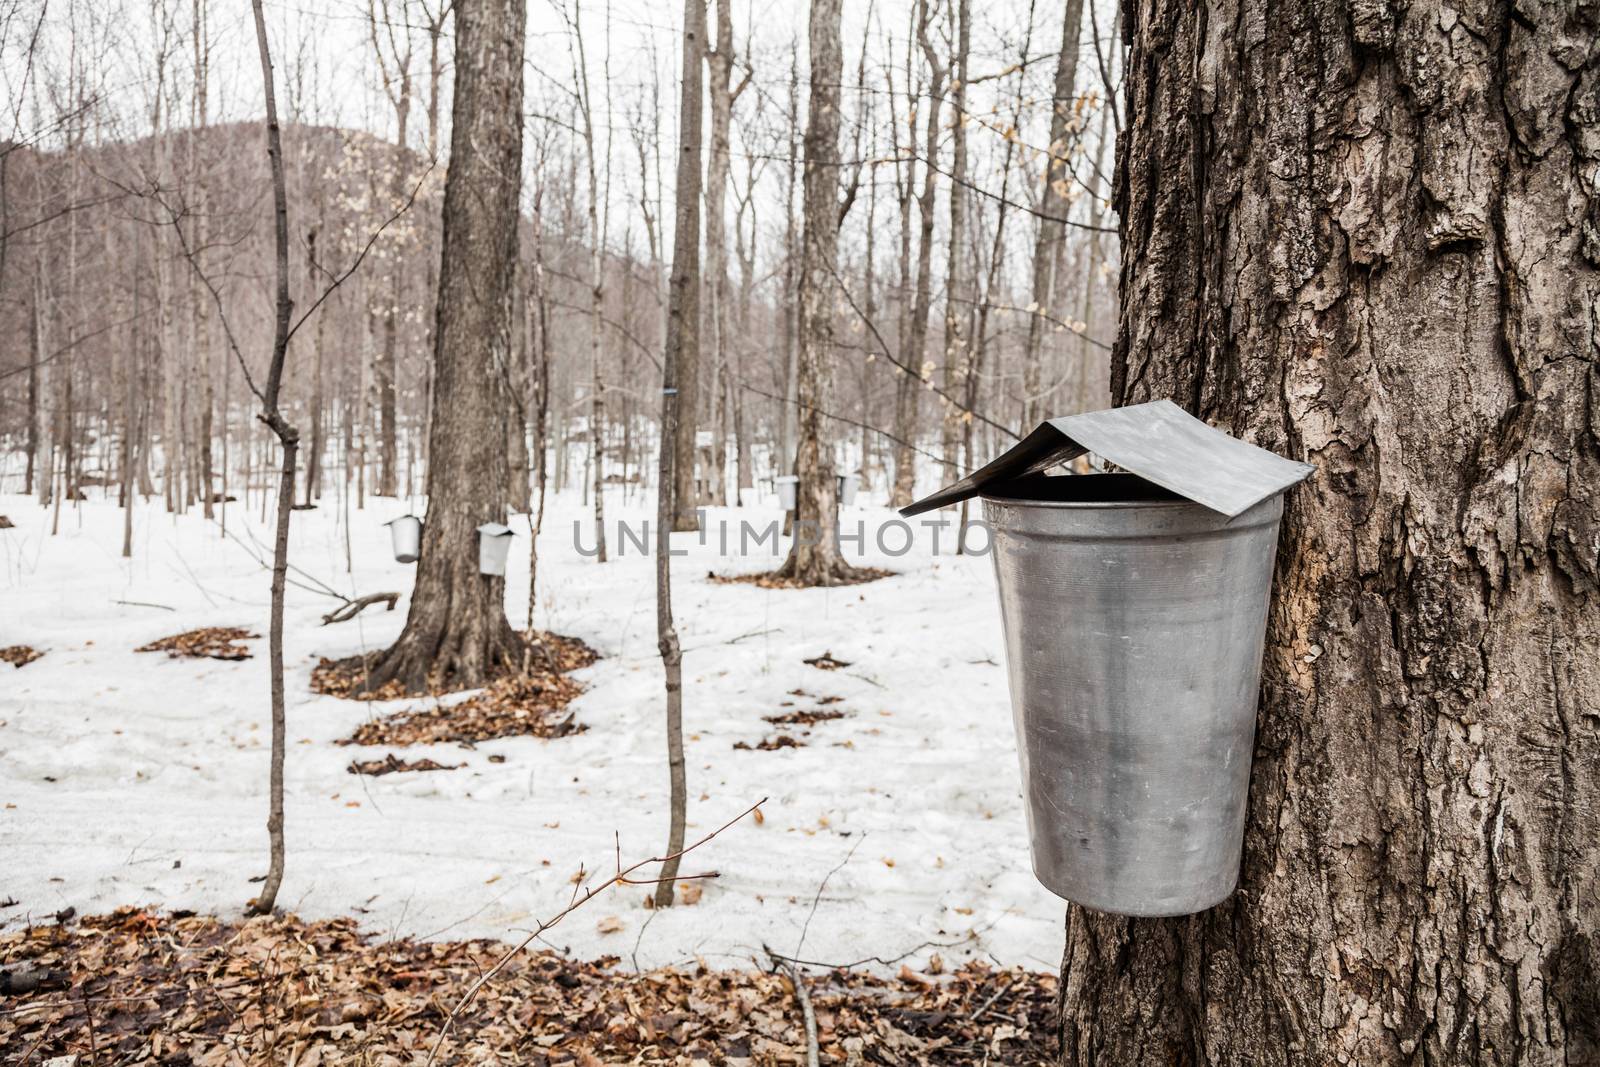 Forest of Maple Sap buckets on trees in spring